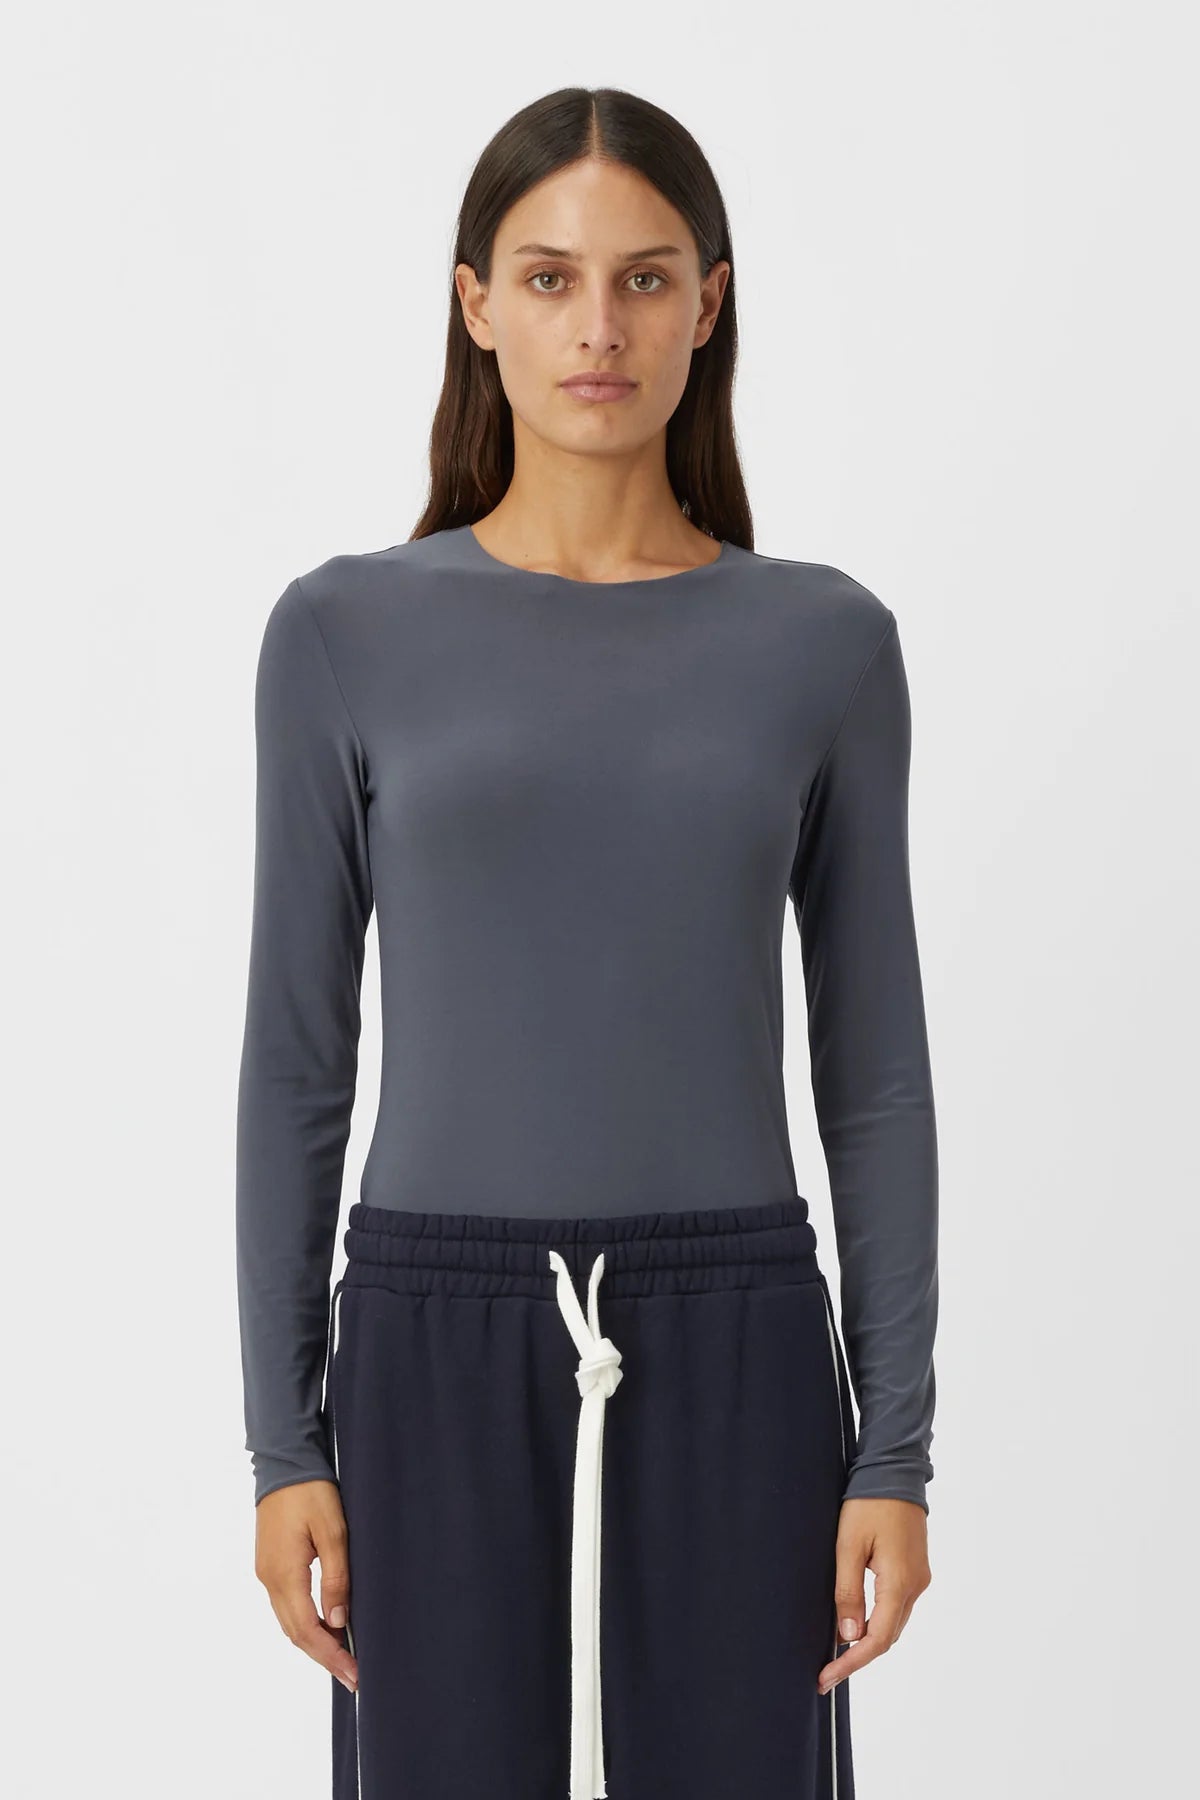 Camilla and Marc Saint Knit Stocking Top -  Pewter